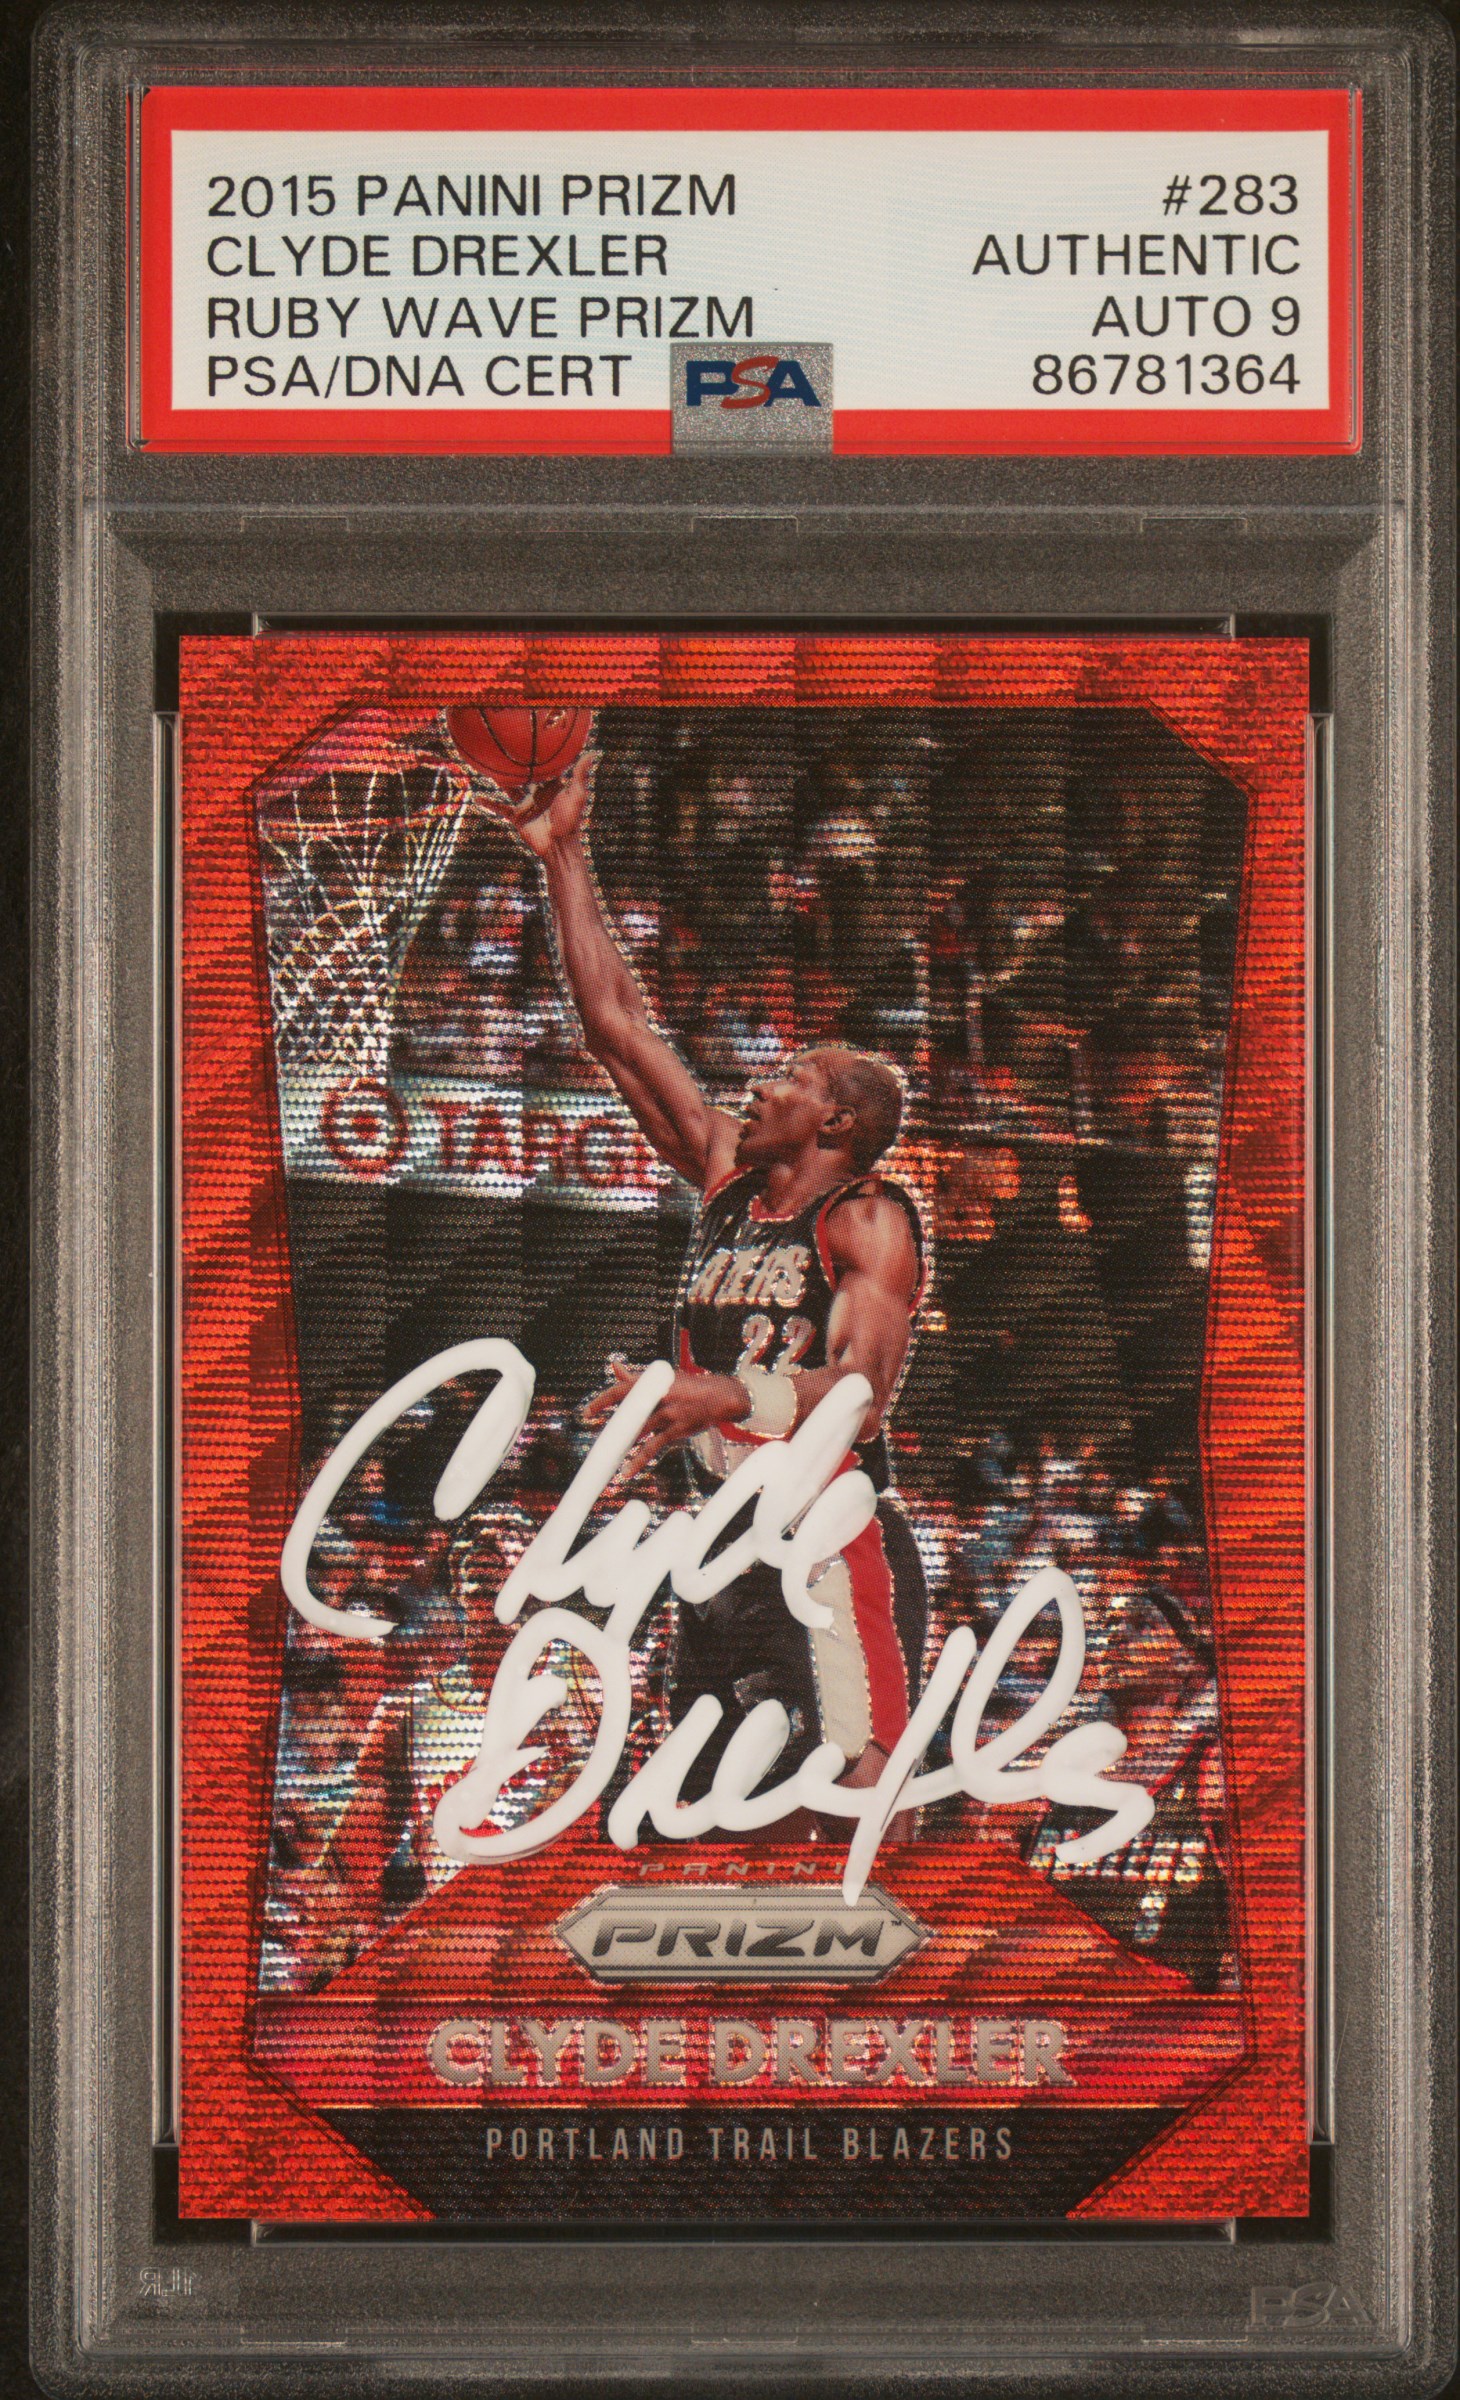 Clyde Drexler 2015 Panini Prizm Ruby Wave Red Card #283 Auto PSA 9 52/350